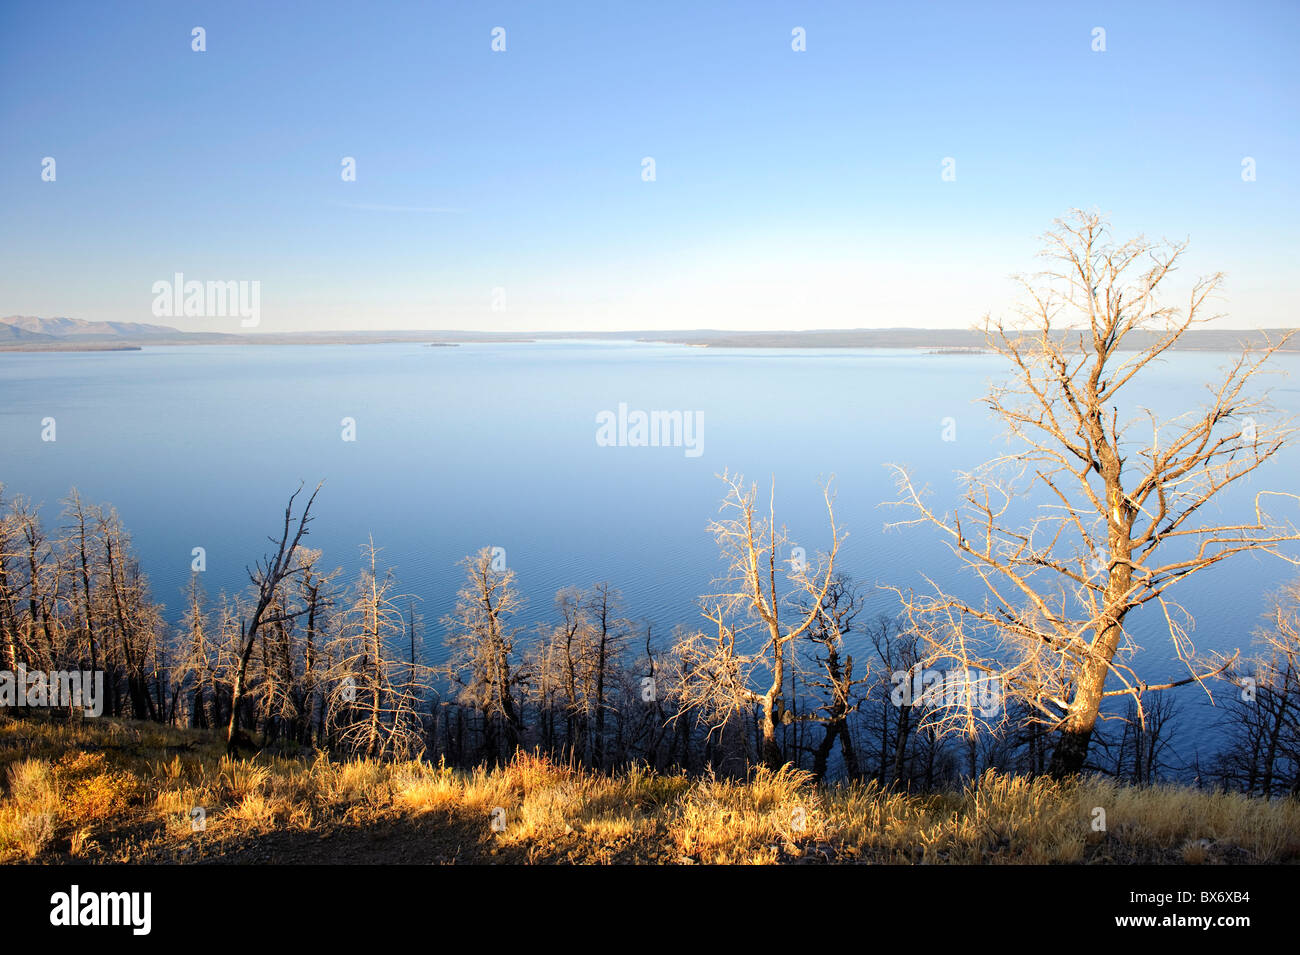 Le Lac Yellowstone, le Parc National de Yellowstone, Wyoming, USA Banque D'Images